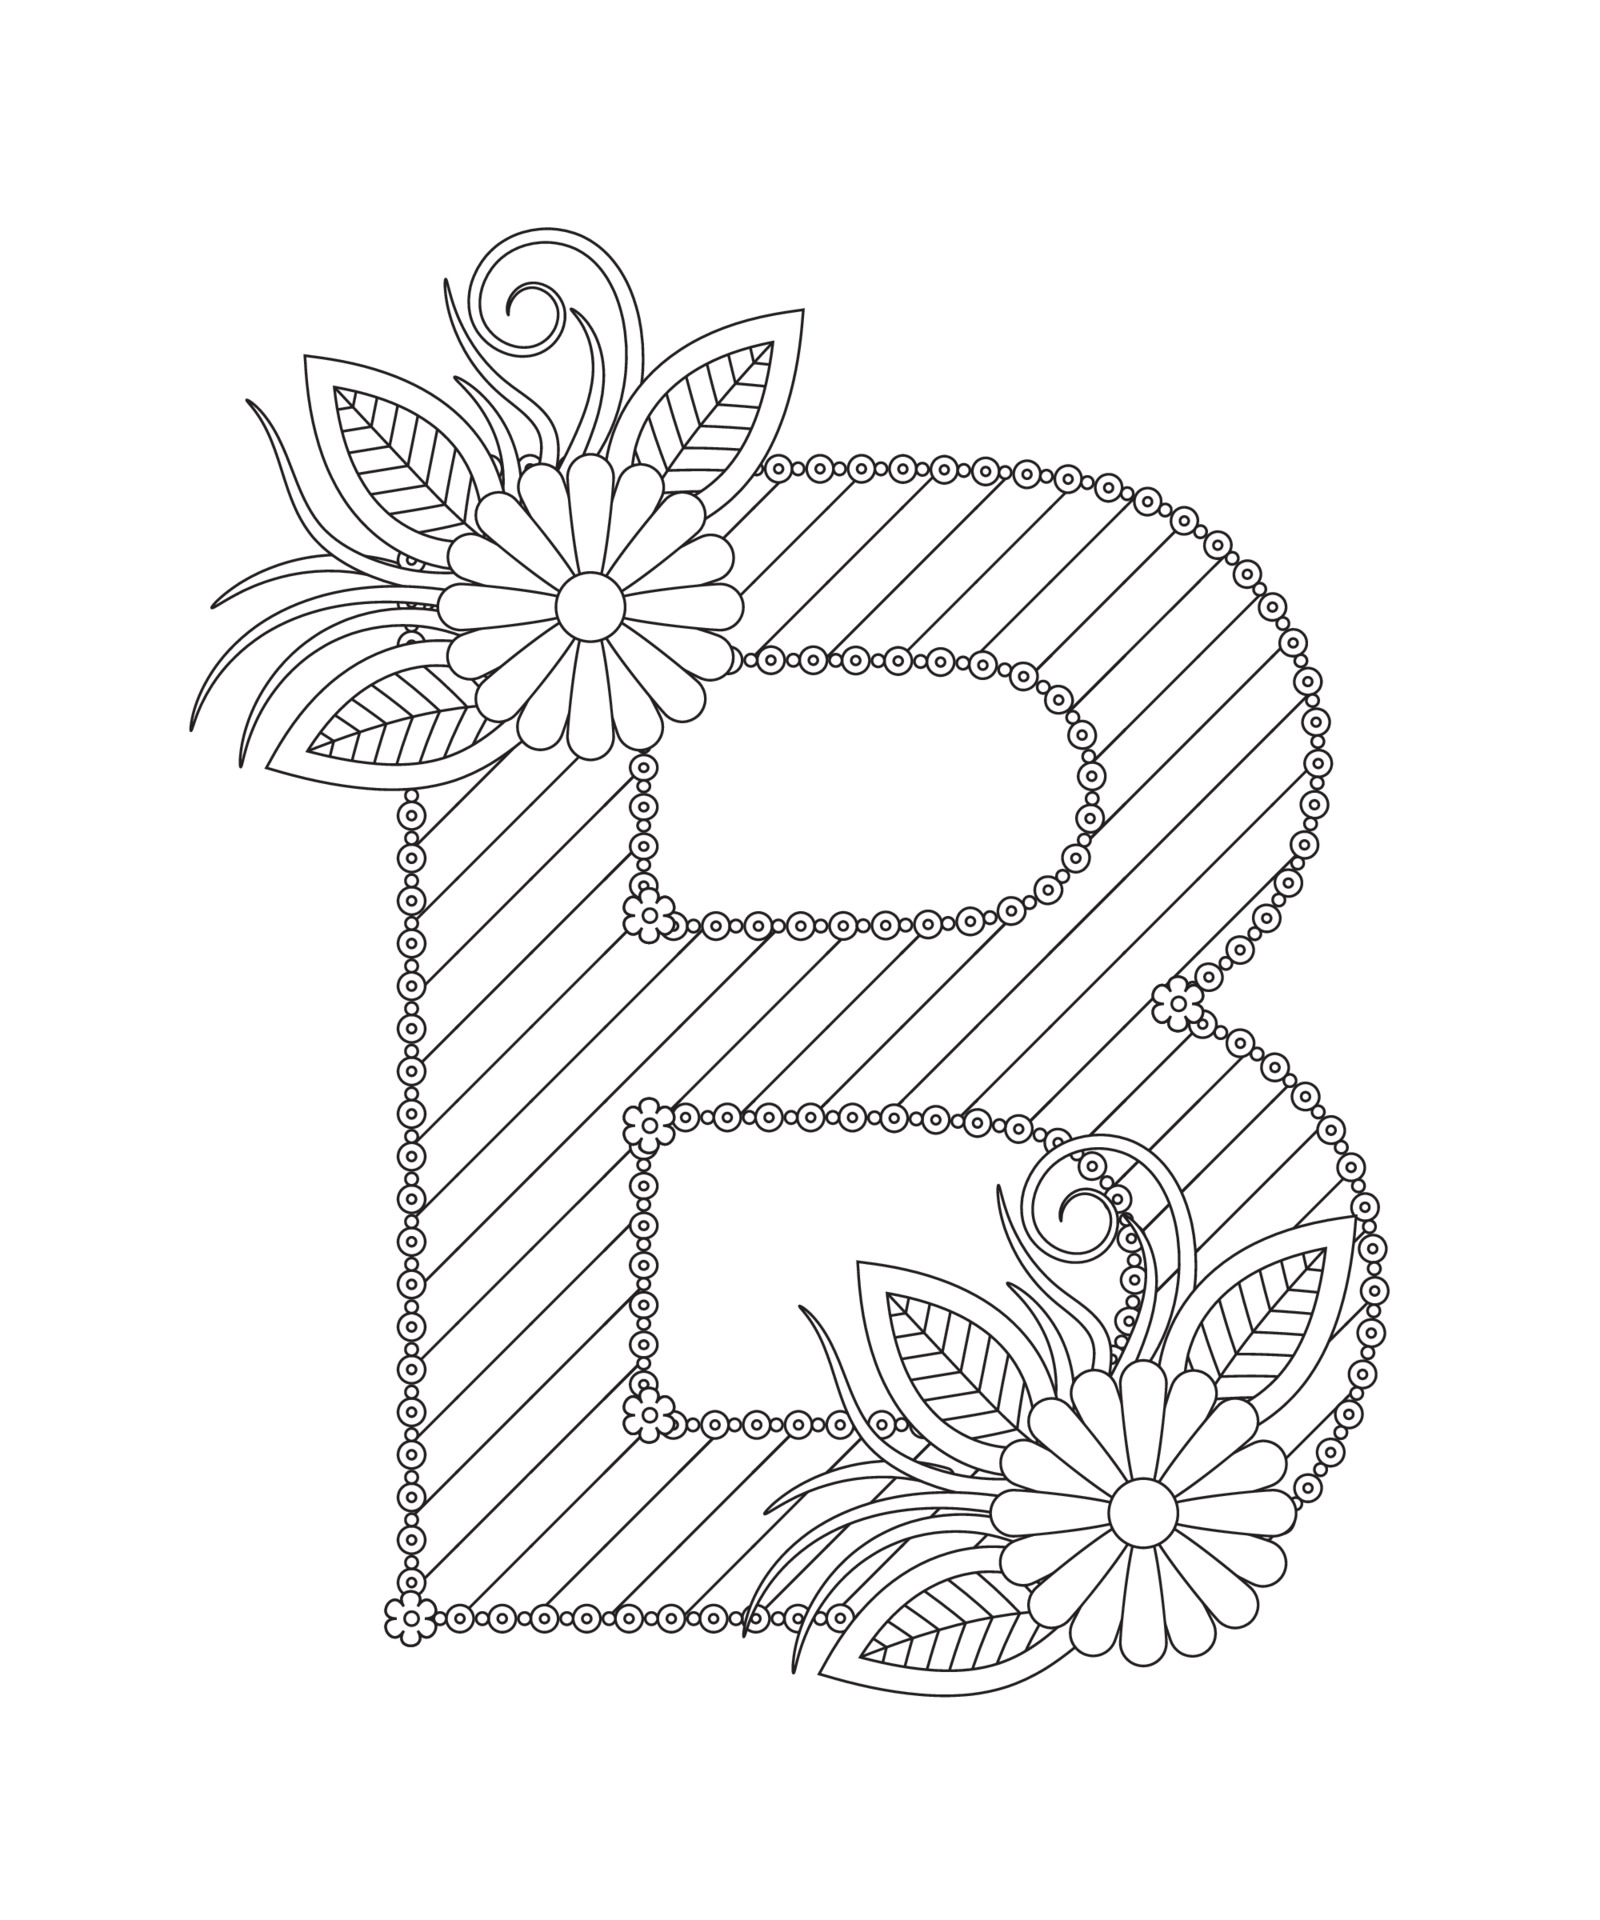 alphabet-coloring-page-with-floral-style-abc-coloring-page-letter-b